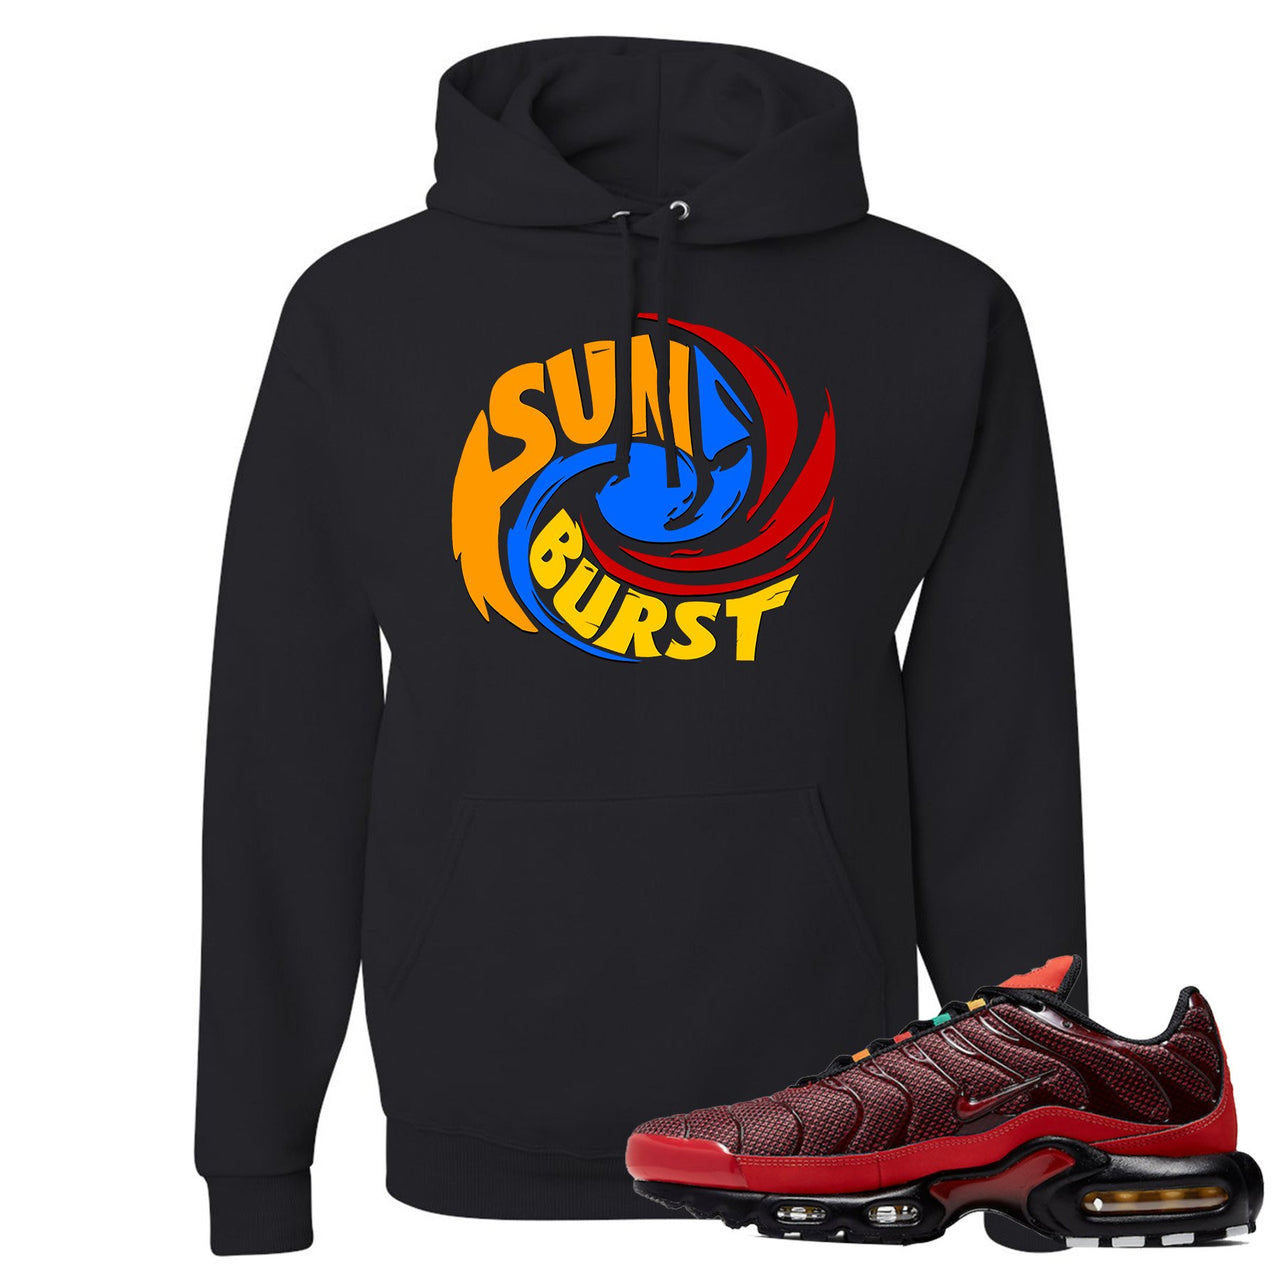 printed on the front of the air max plus sunburst sneaker matching black pullover hoodie is the sunburst hurricane logo